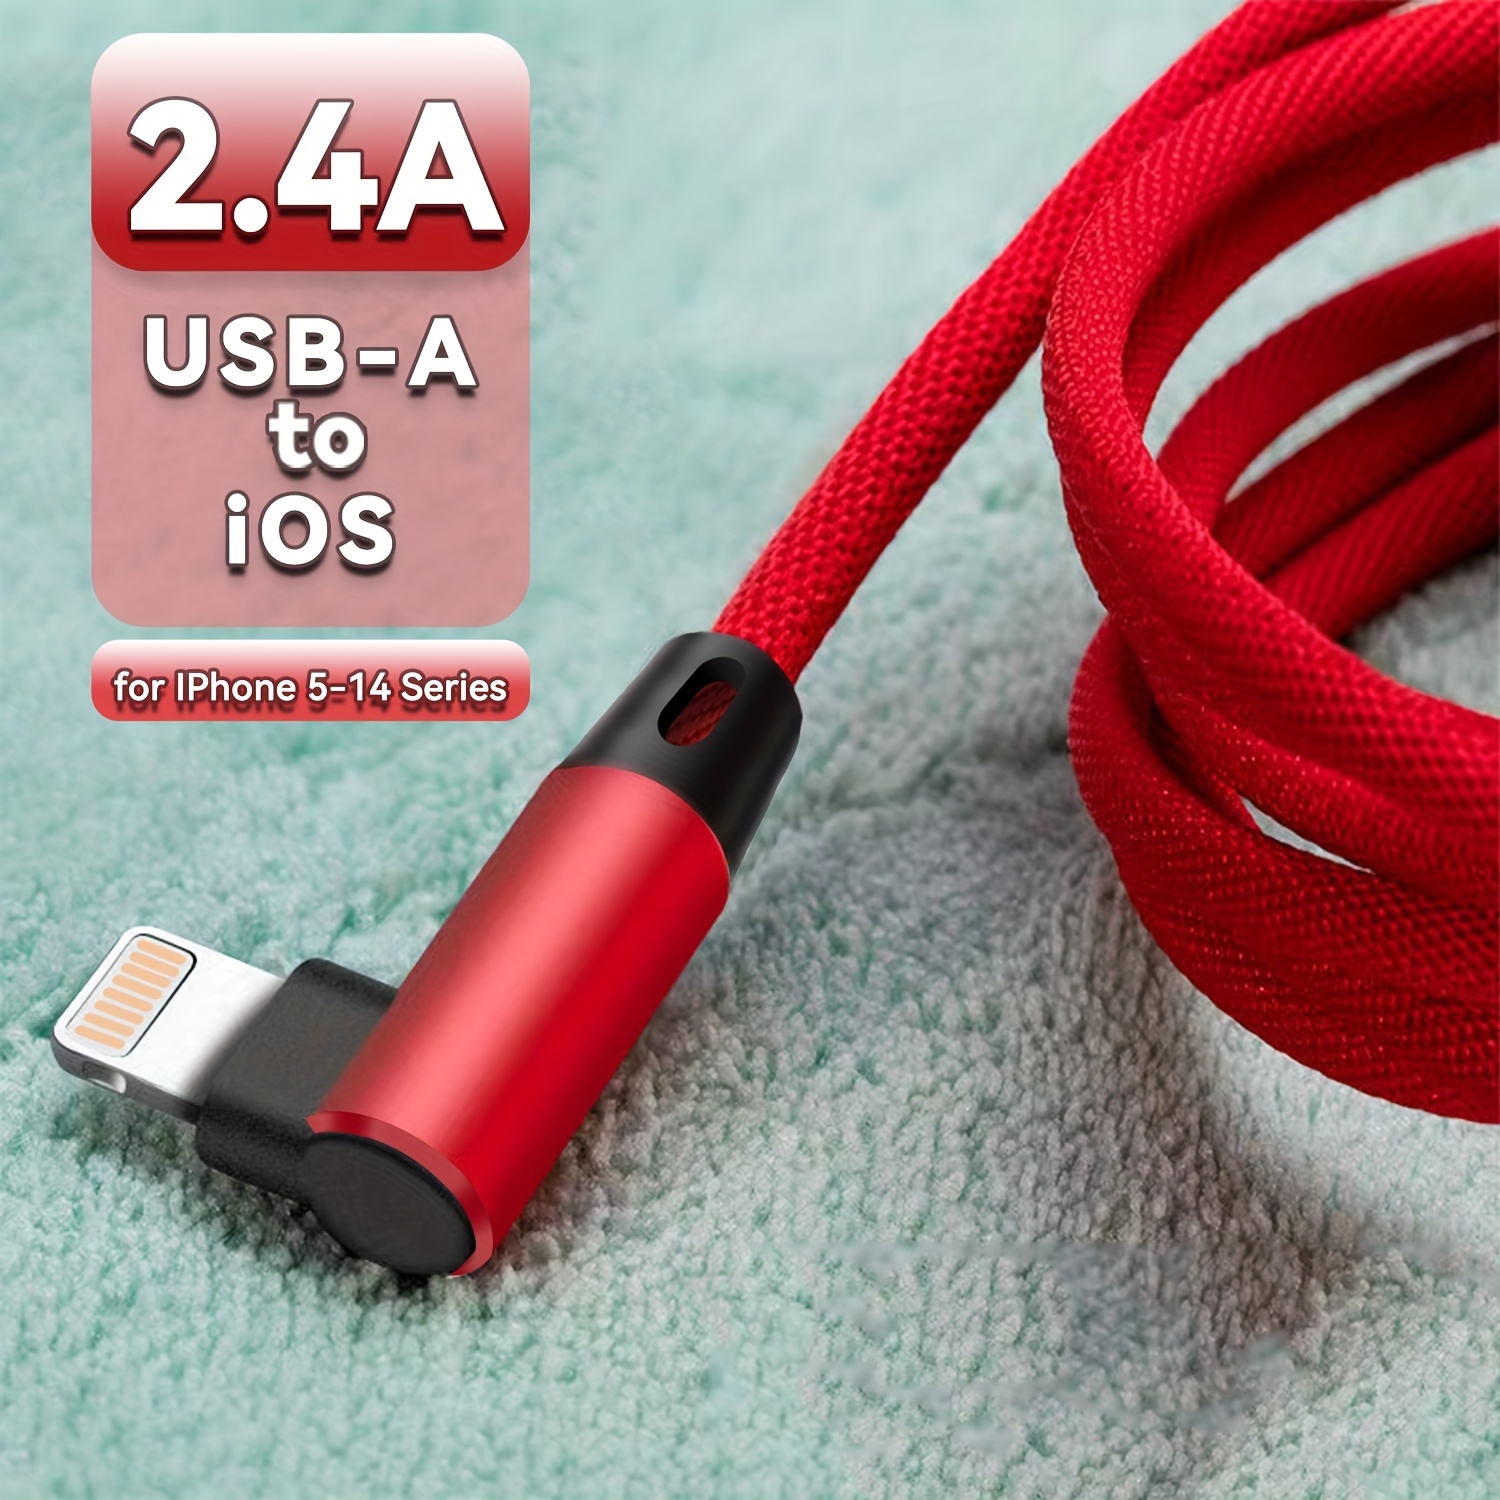 

durable Nylon" Binboom Mfi Certified 12w Fast Charge Usb-a To Cable - Durable Nylon, Flat Design For 5-14 Series & Ipad/ipod - High-speed Data Transfer